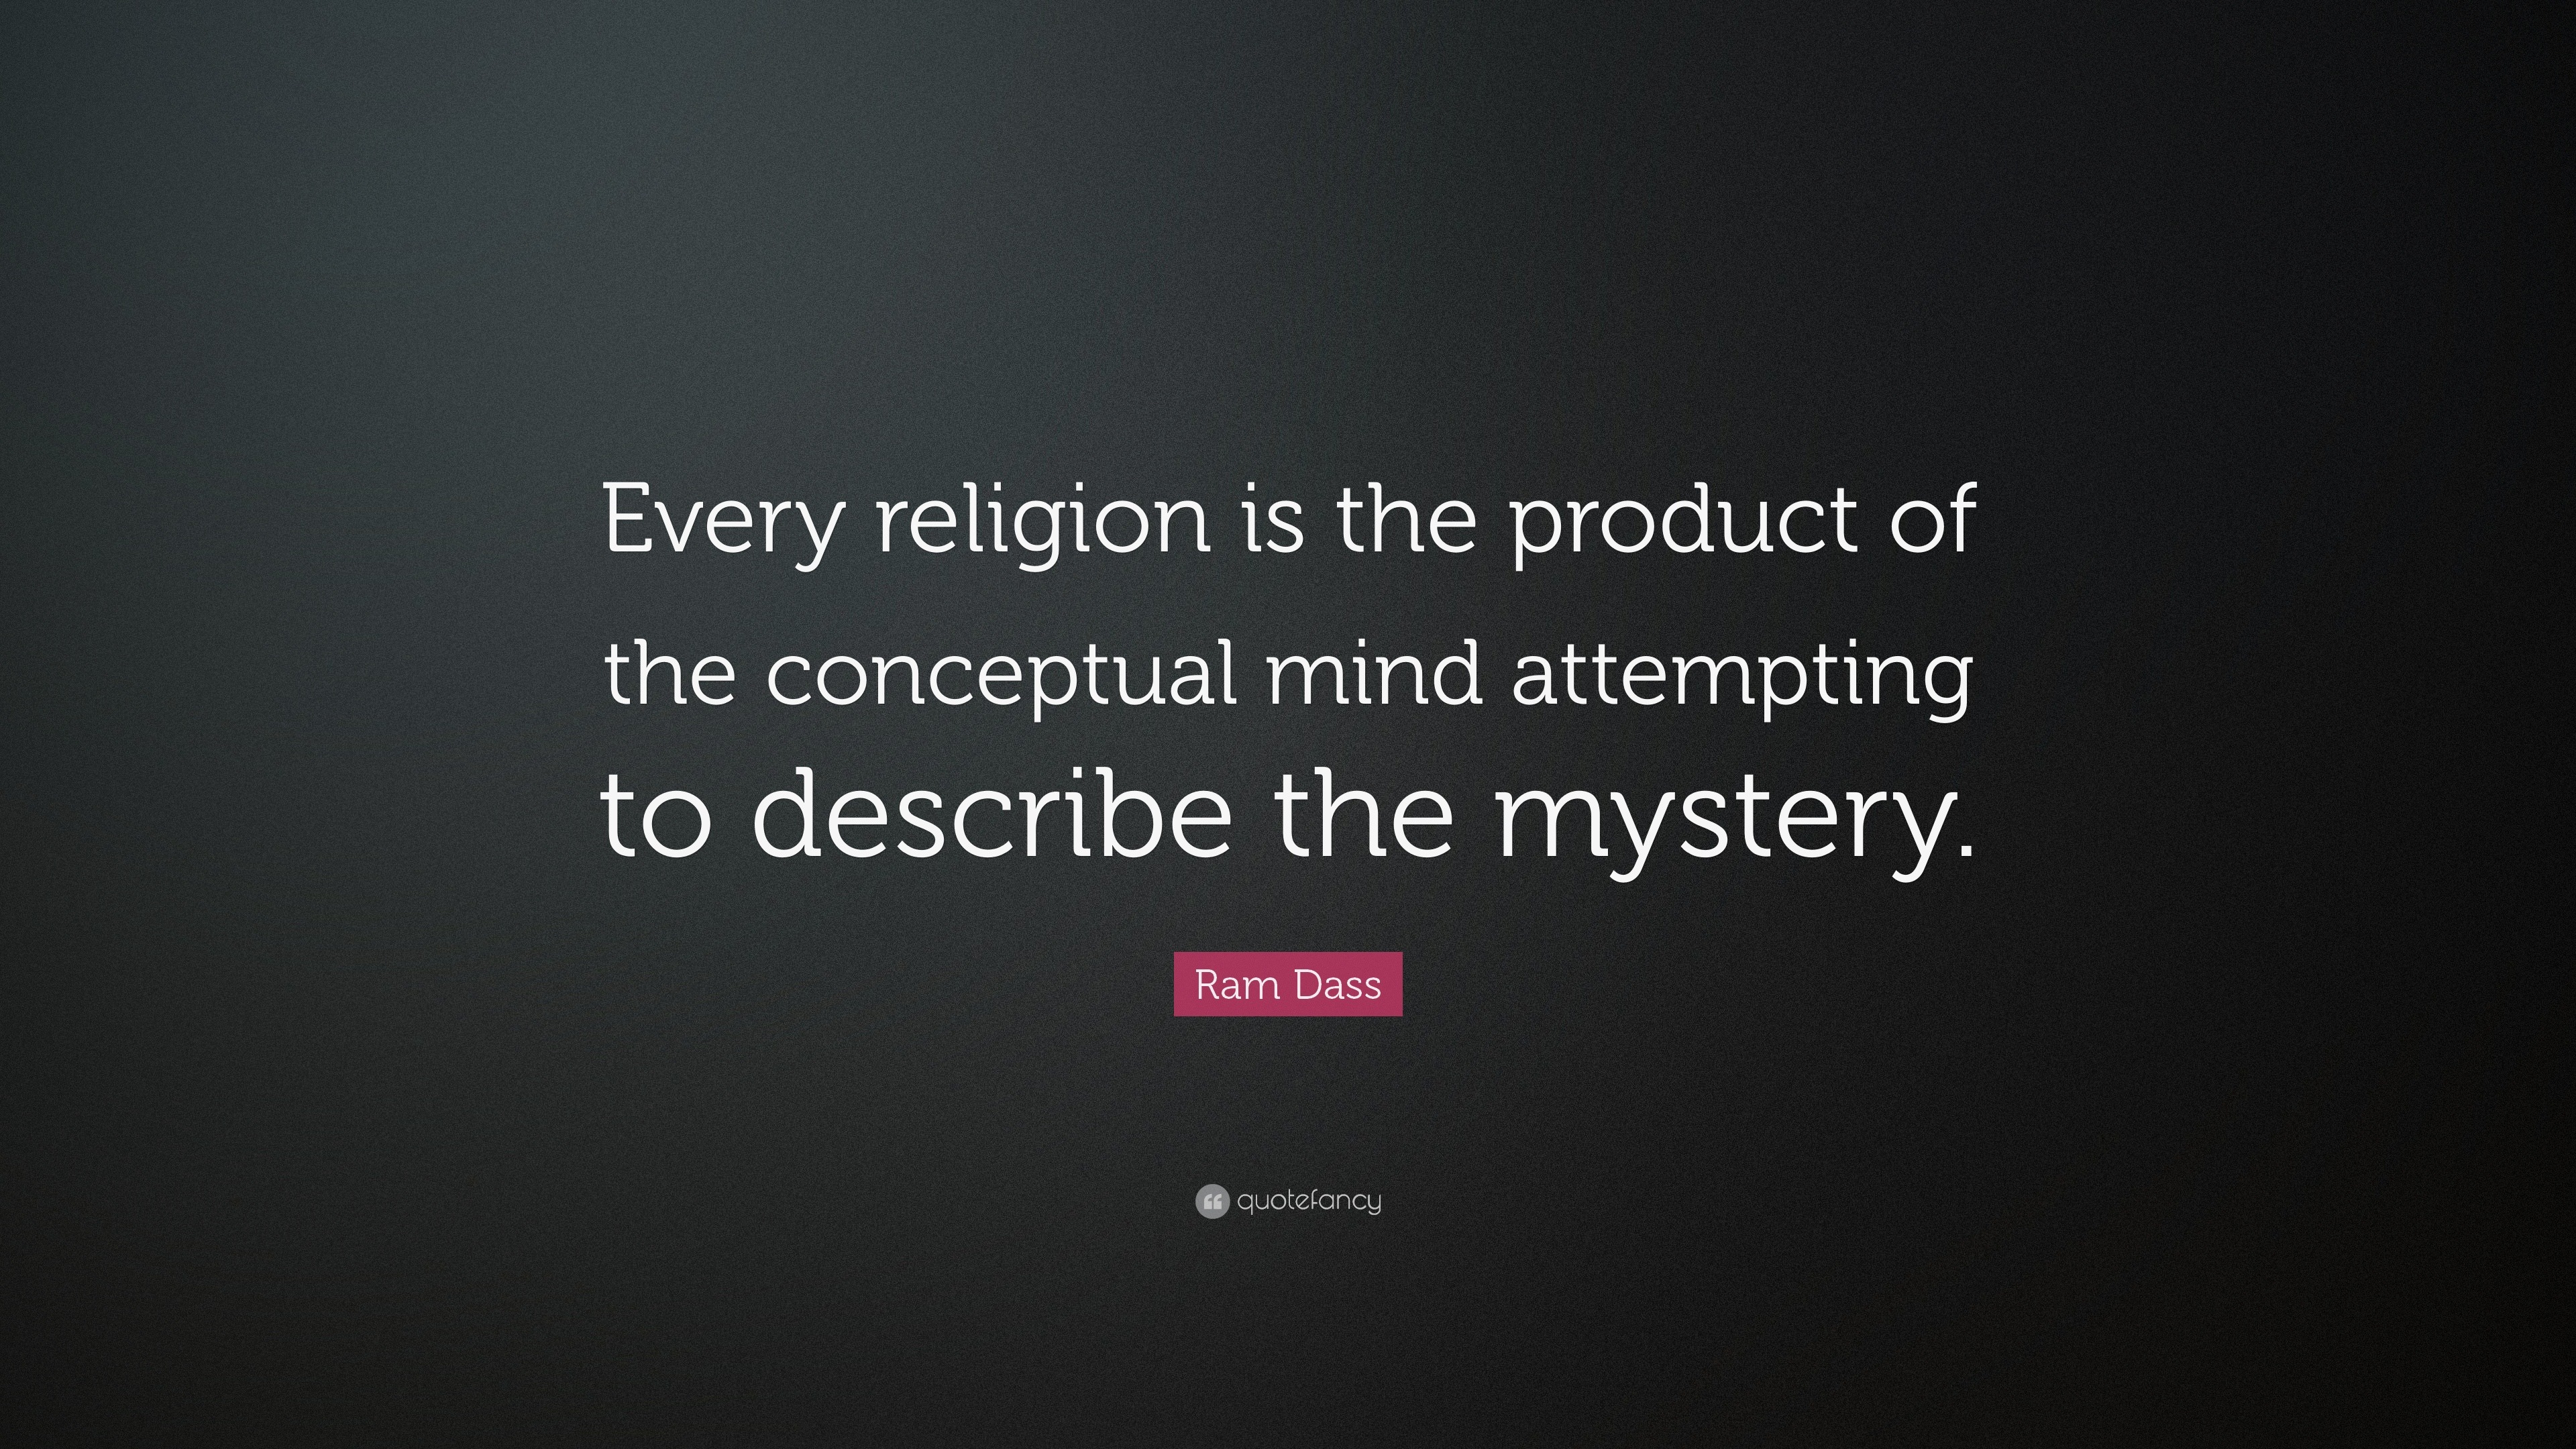 Ram Dass Quote: “Every religion is the product the conceptual mind attempting to describe